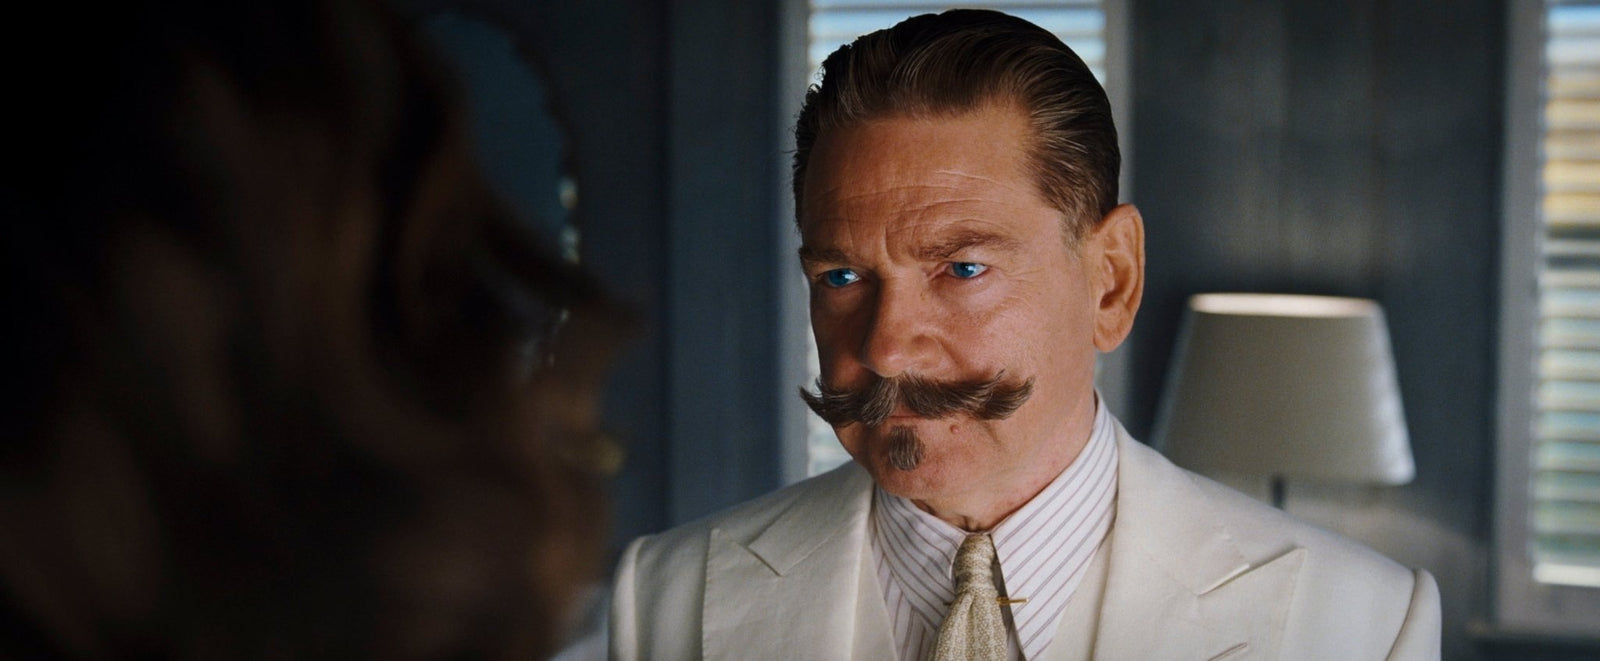 The Famous Hercule Poirot's Attire in "Death on the Nile" - A Hand Tailored Suit